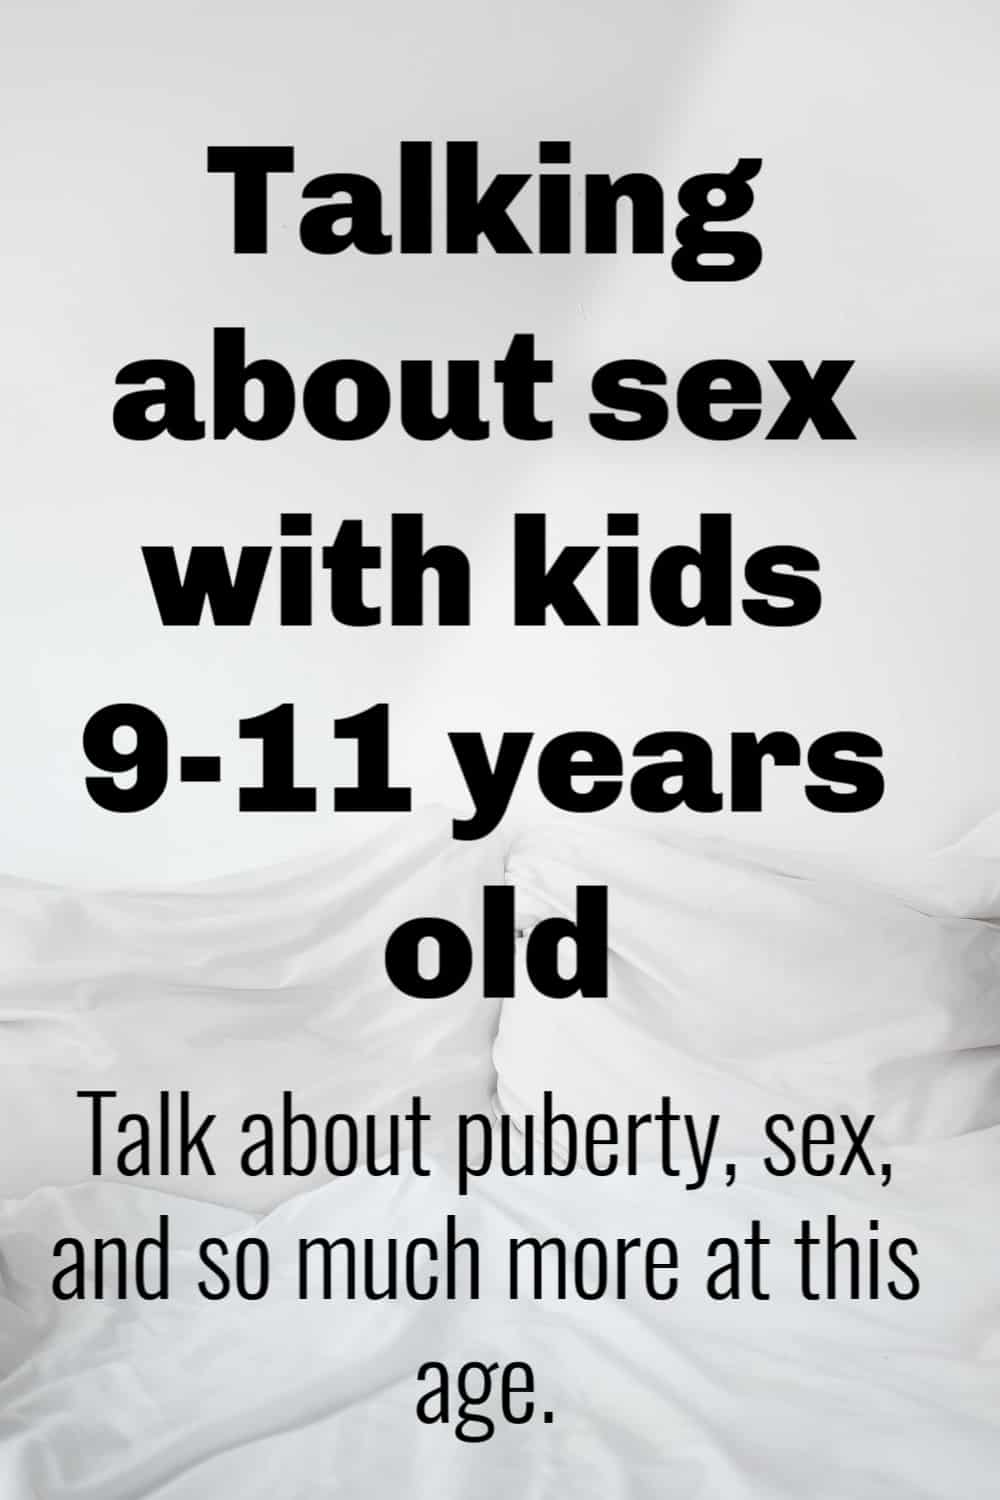 Talking about sex with kids 9-11 years old - Talk about puberty, sex, and much more when talking with kids this age. It's time to set them up for their future. 